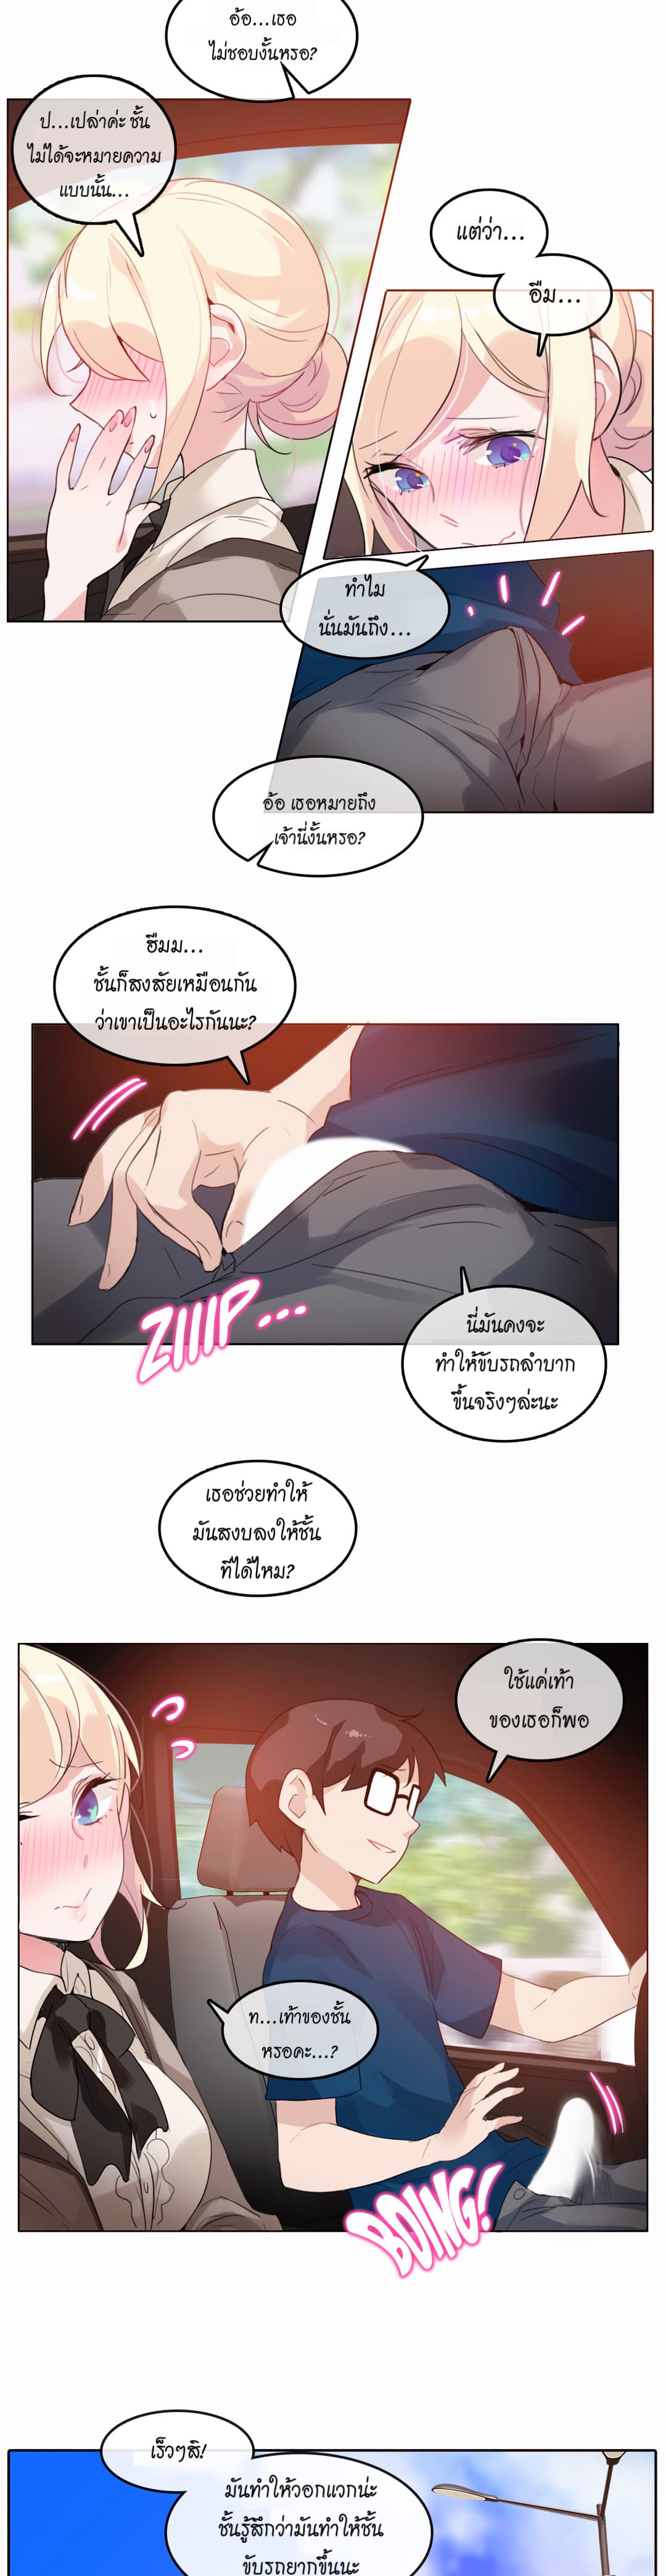 A Pervert’s Daily Life 19 (3)